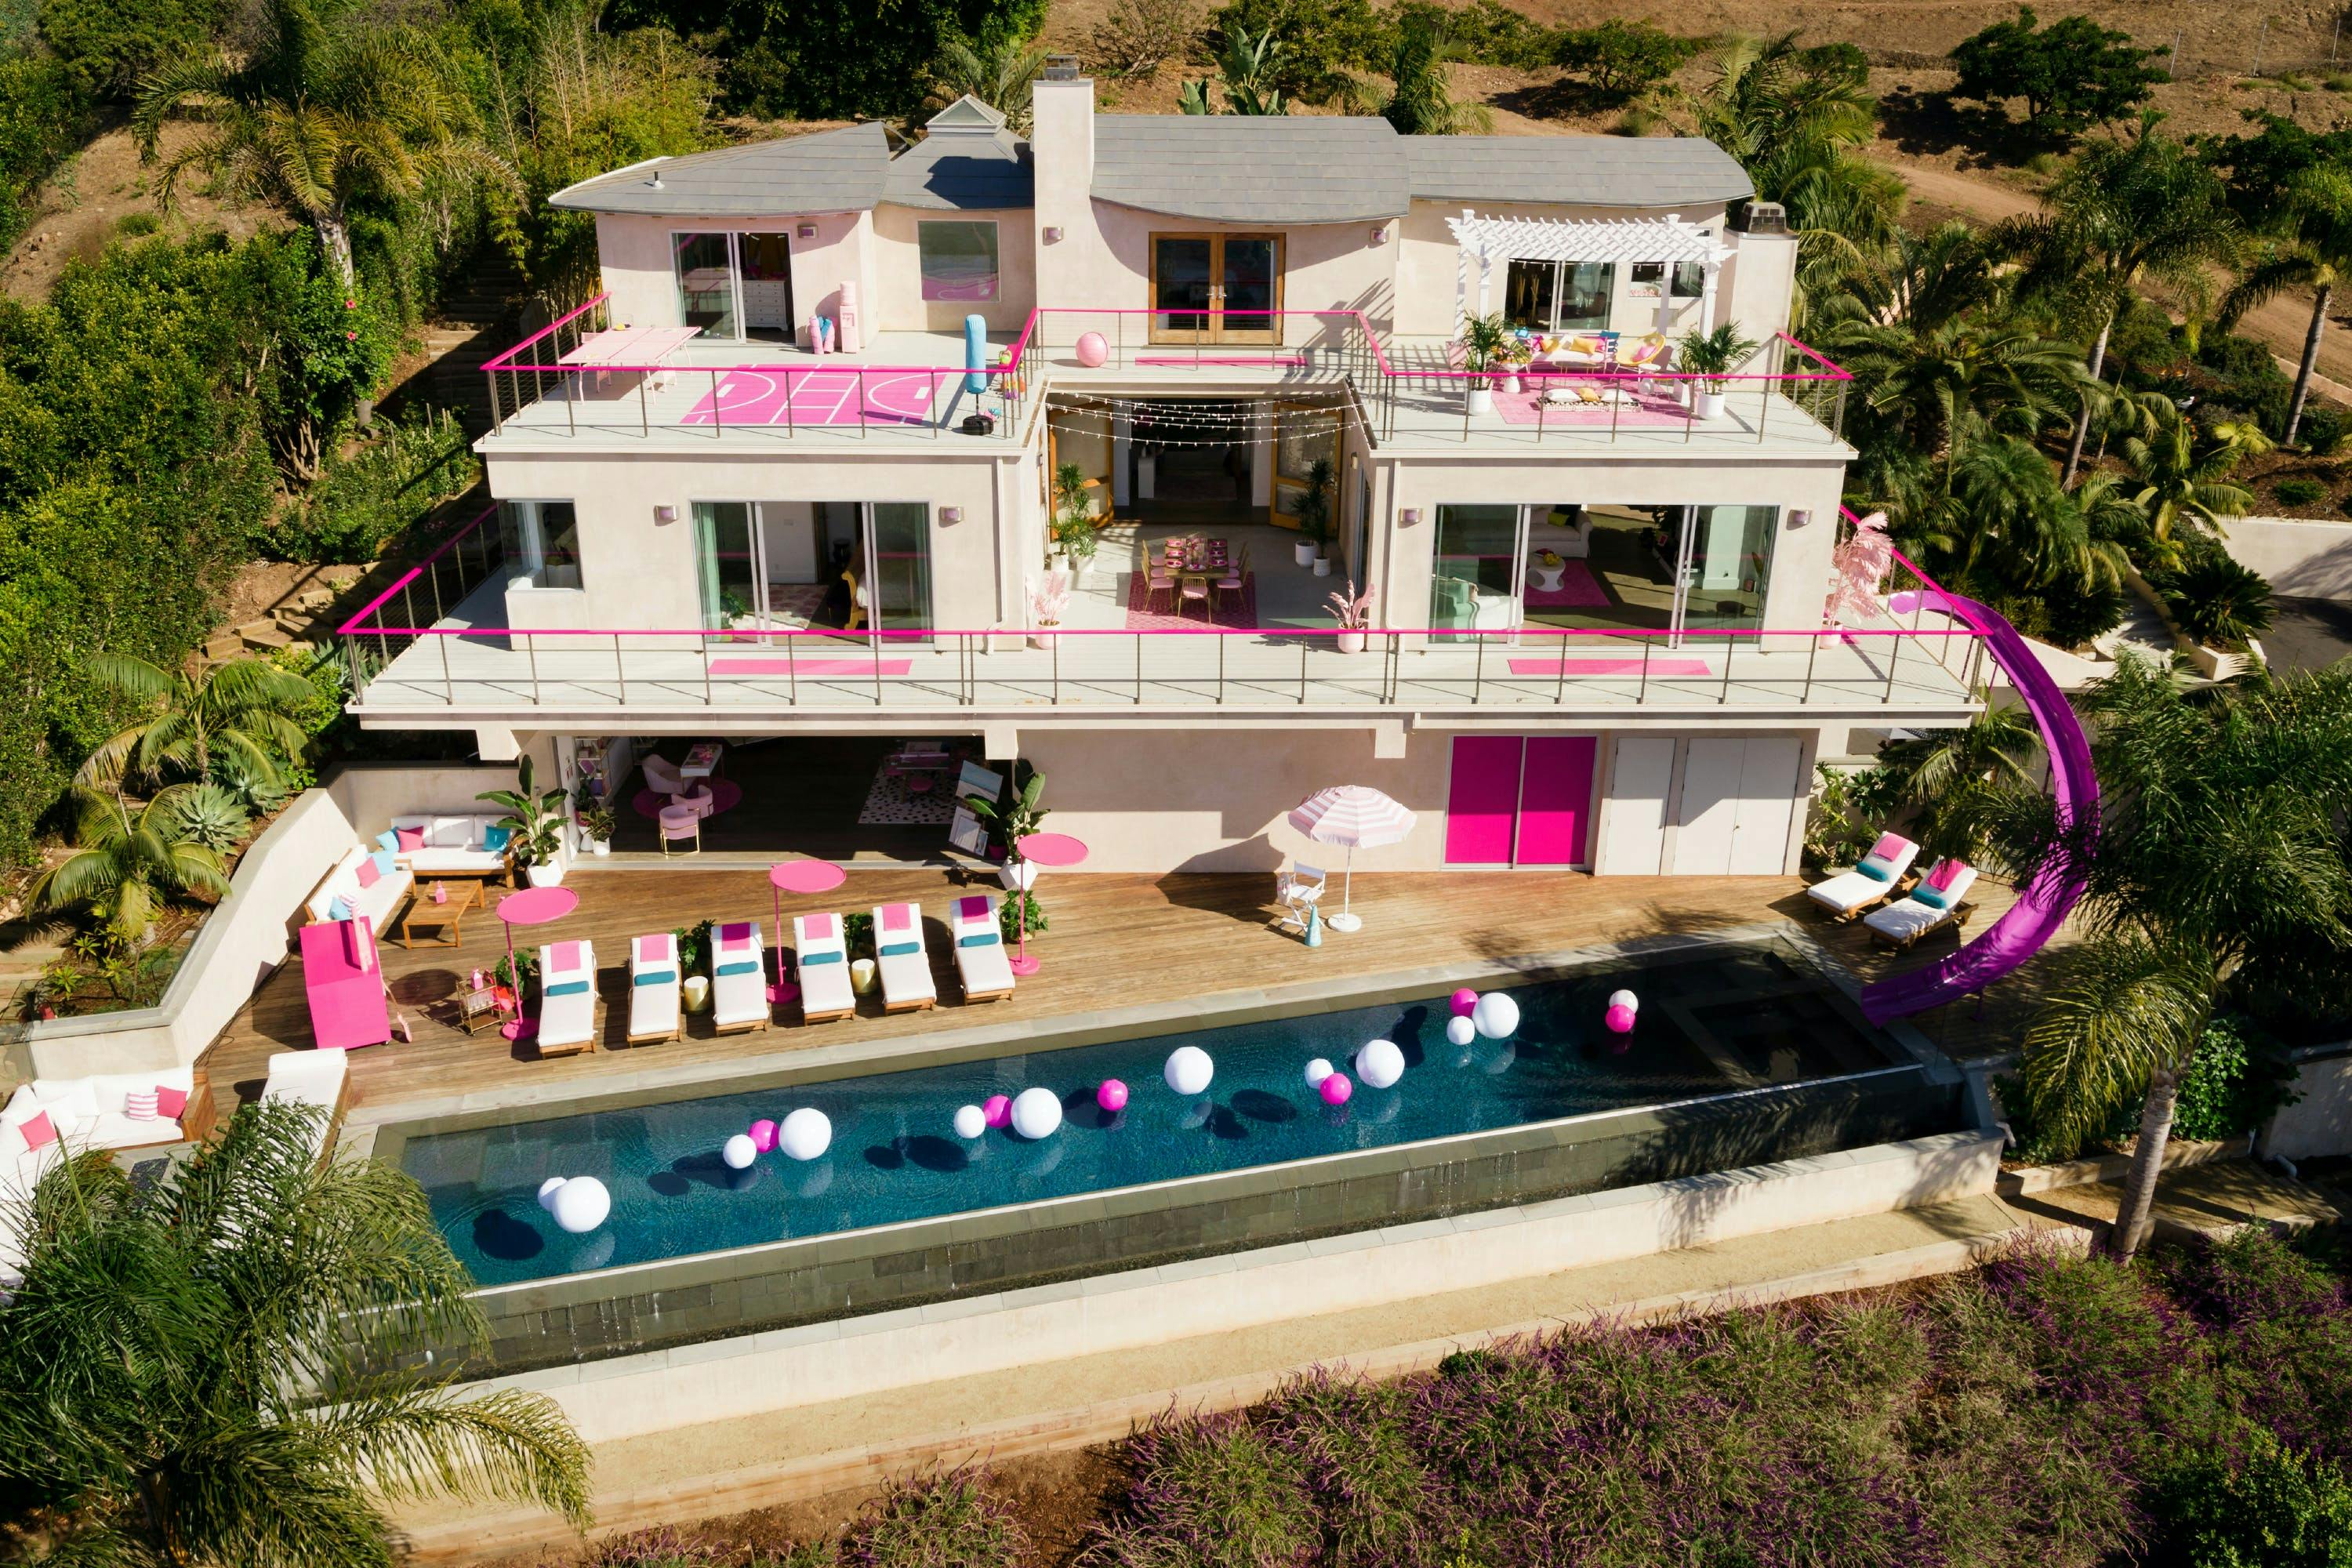 Pink Barbie Malibu DreamHouse is now up for rent on Airbnb, hosted by Ryan Gosling.